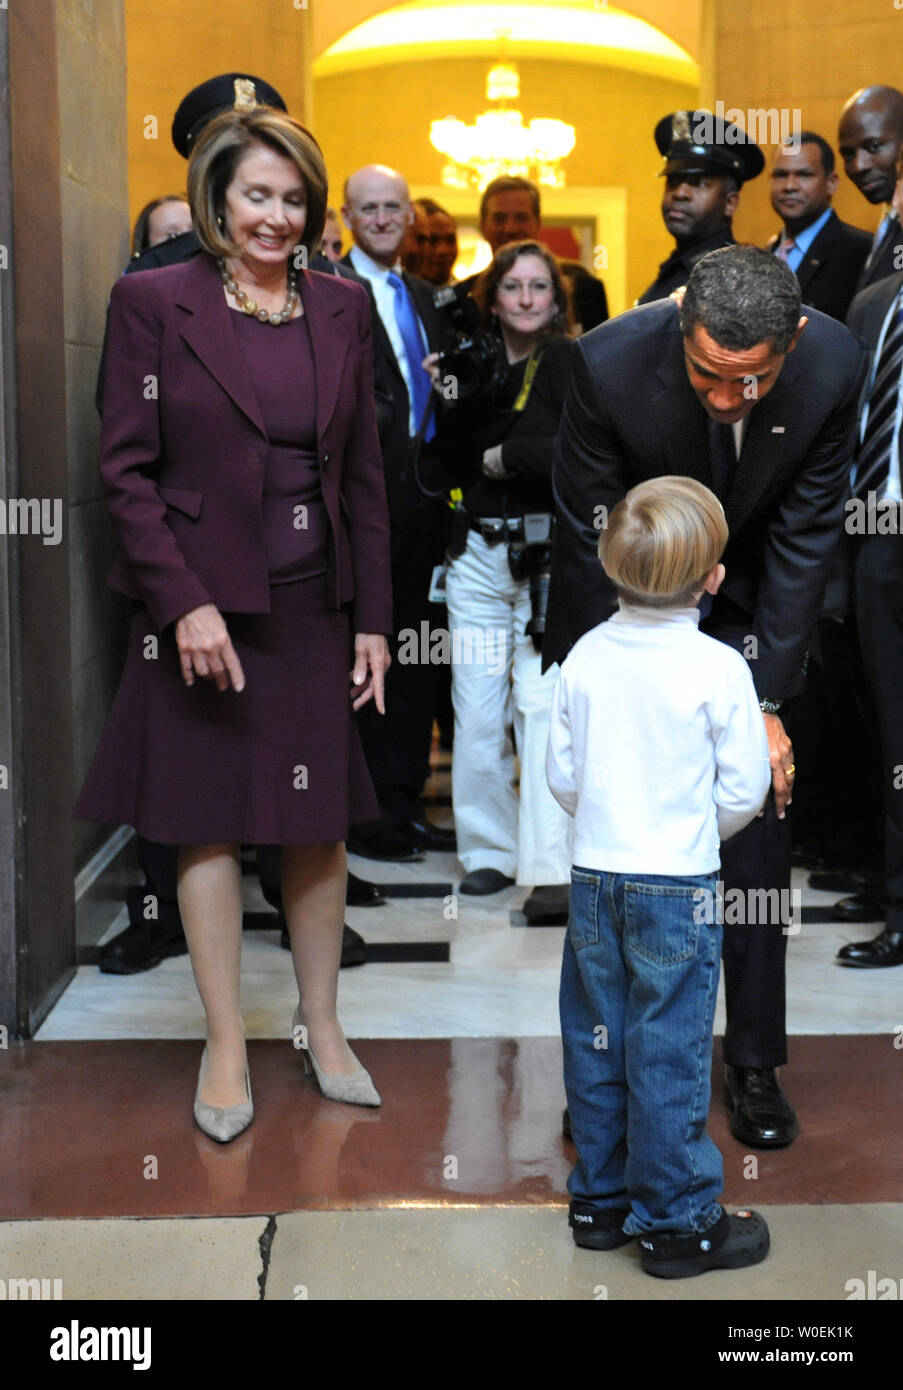 President-elect Barack Obama greets Carl Metz, a young visitor at the Capitol Building, after a meeting with Speaker of the House Nancy Pelosi (D-CA) (L) in Washington on January 5, 2008. (UPI Photo/Kevin Dietsch) Stock Photo